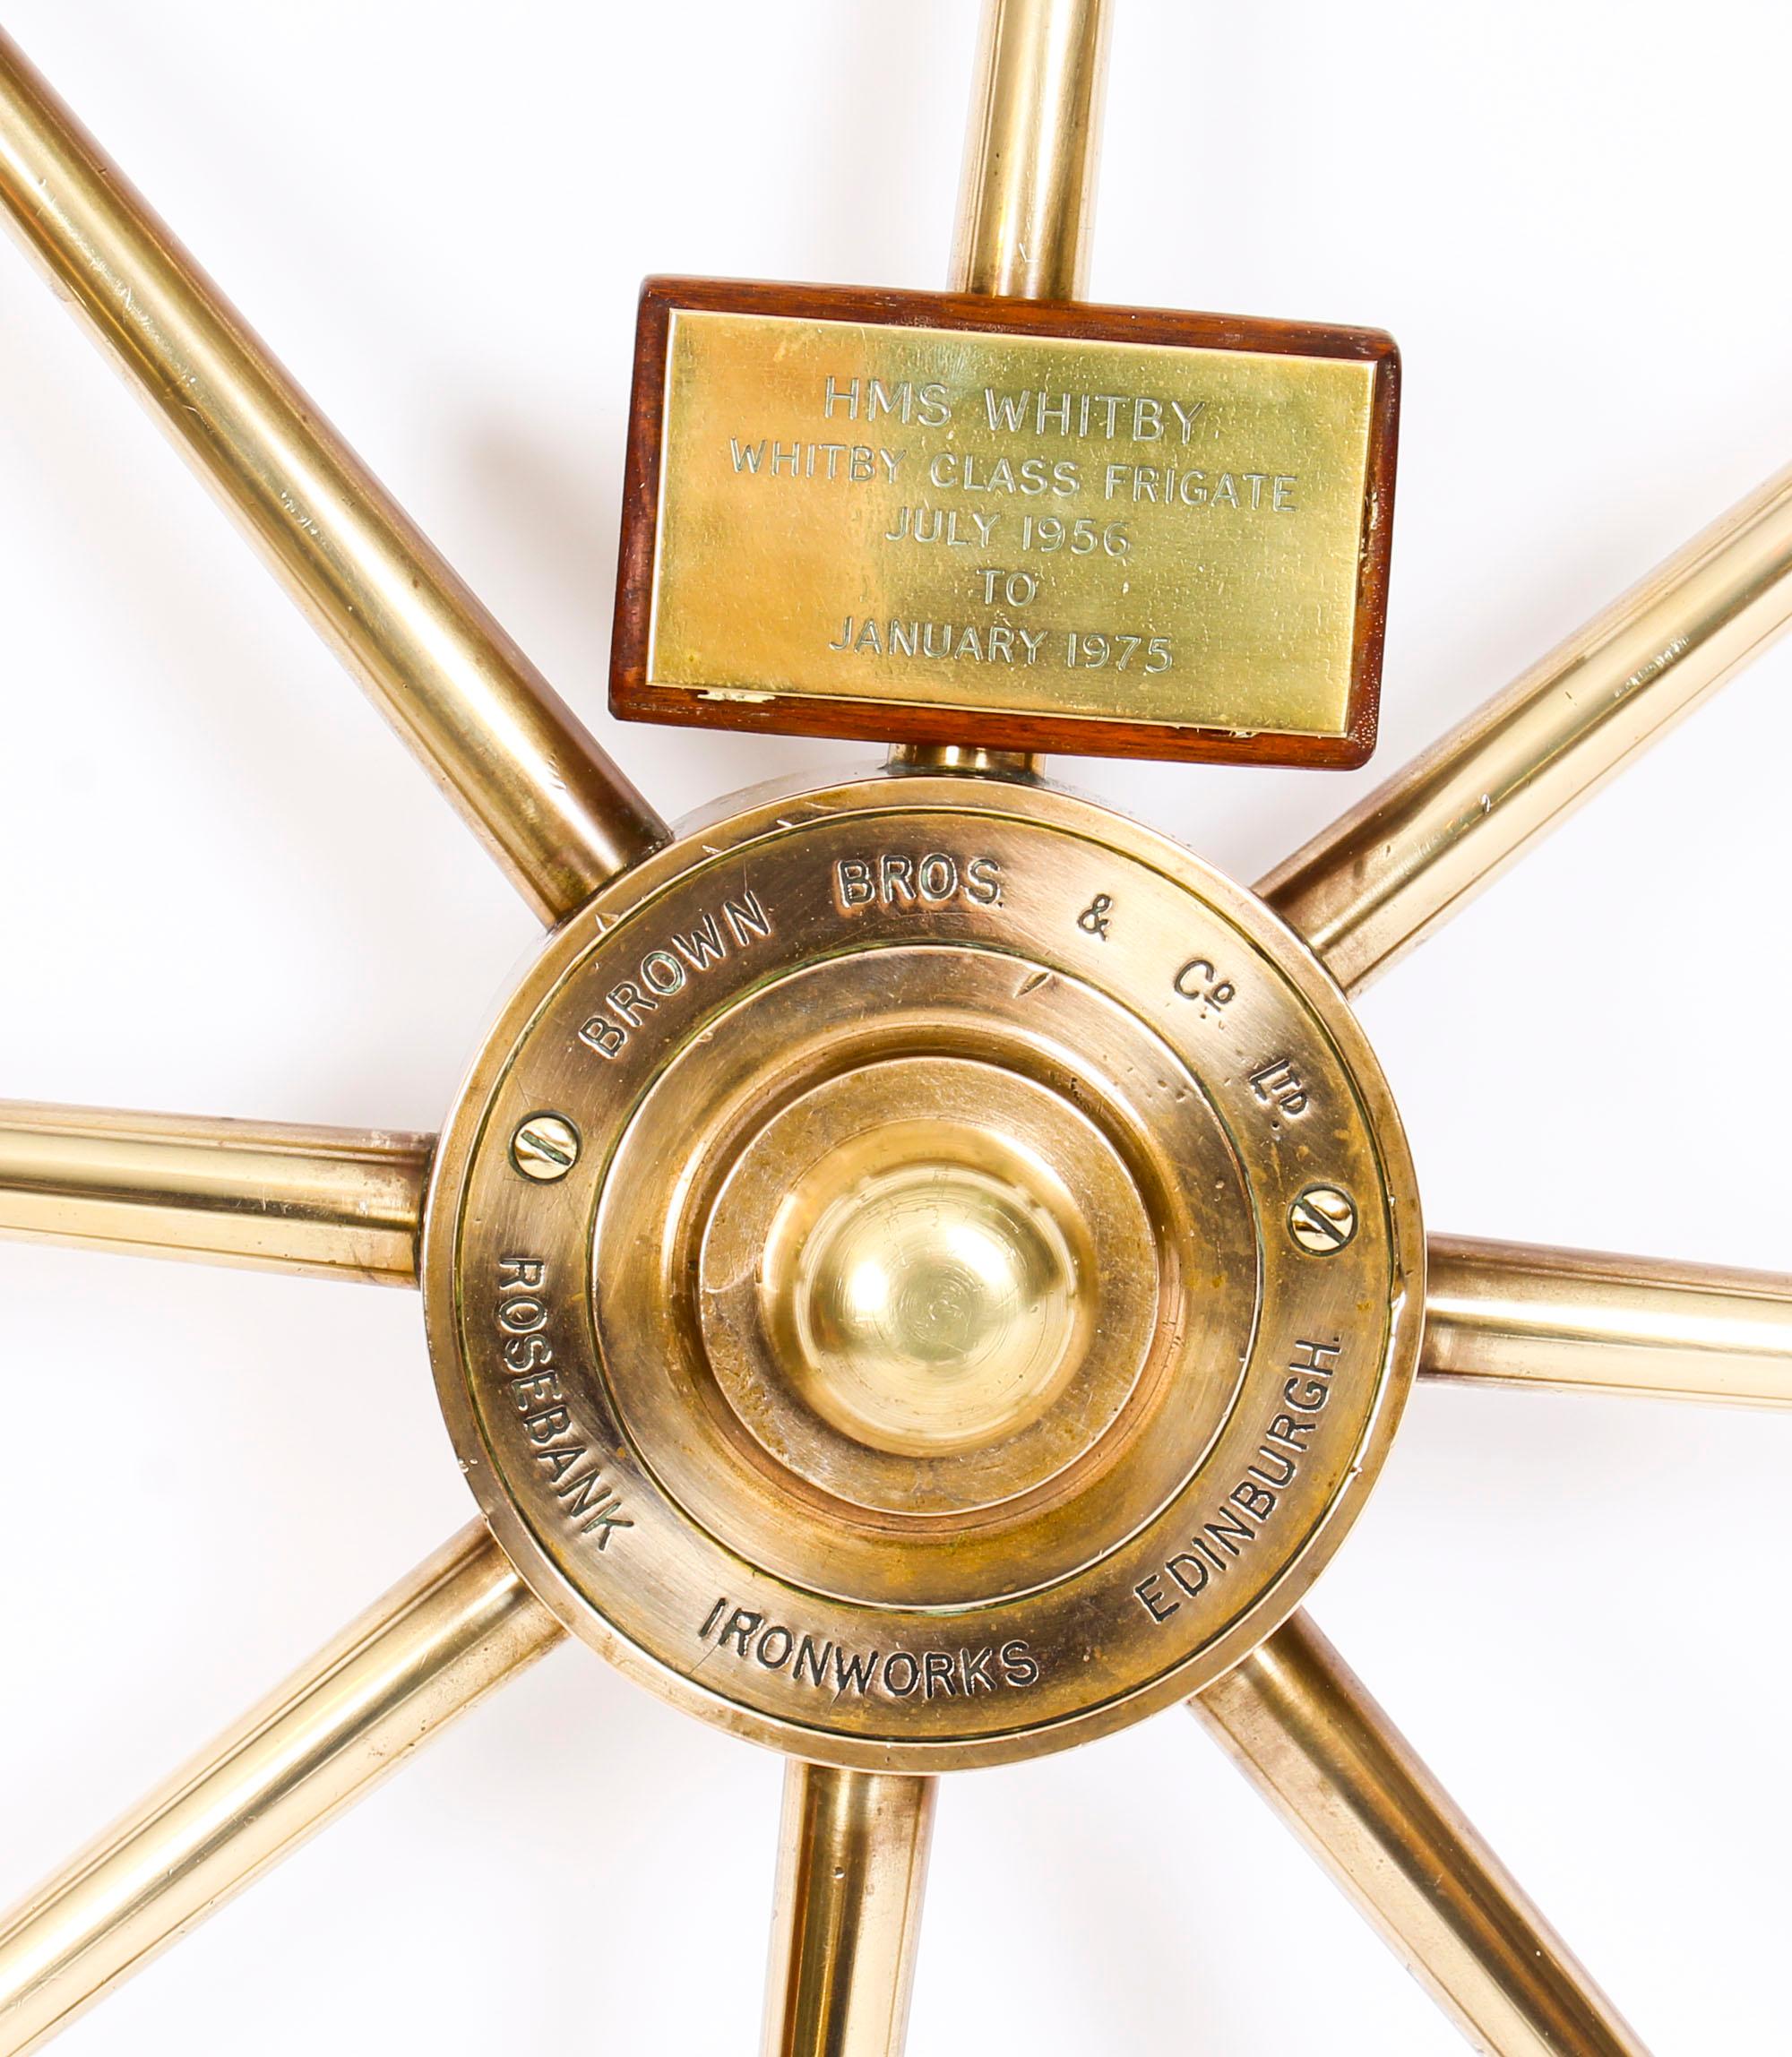 This is a superb midcentury brass and walnut ships wheel by the renowned Scottish manufacturer, Brown Brothers and Co, Edinburgh, circa 1950 in date.

This exceptional nautical collectable features eight elegant turn king cylindrical spokes ending